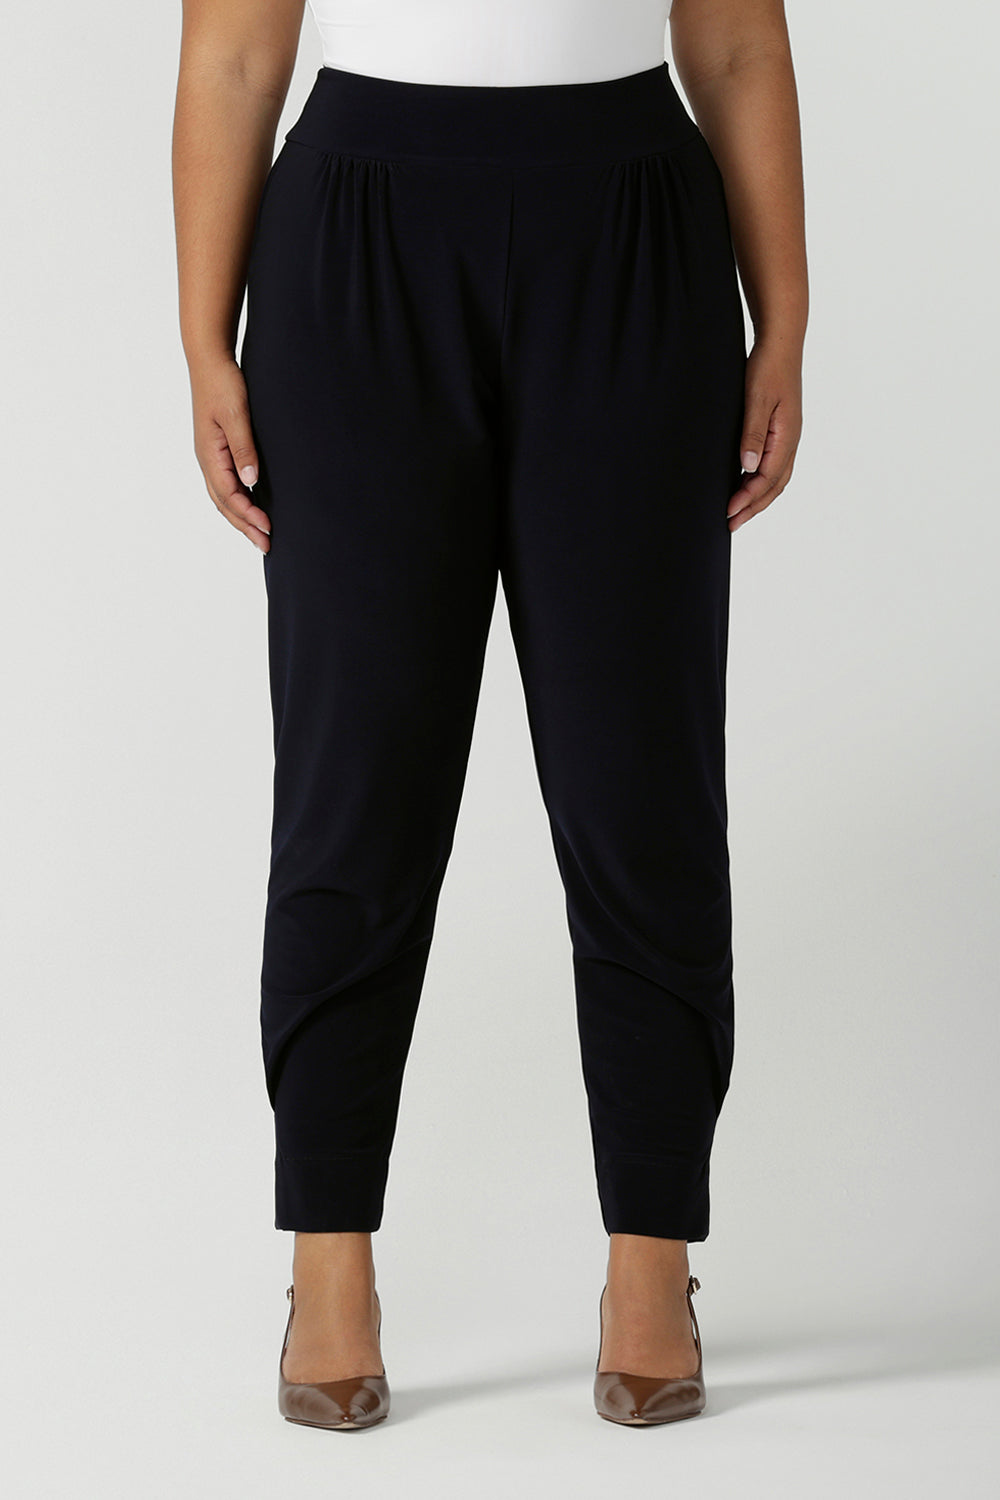 Designed as a full length travel pant for tall women. A size 18 curvy woman wears great pants for travel, these dropped crotch, single seam navy pants are made stretchy jersey for ultimate comfort. Worn with a white bamboo jersey top , shop these comfy navy pants for your travel and capsule wardrobe now! Available in sizes 8-24.